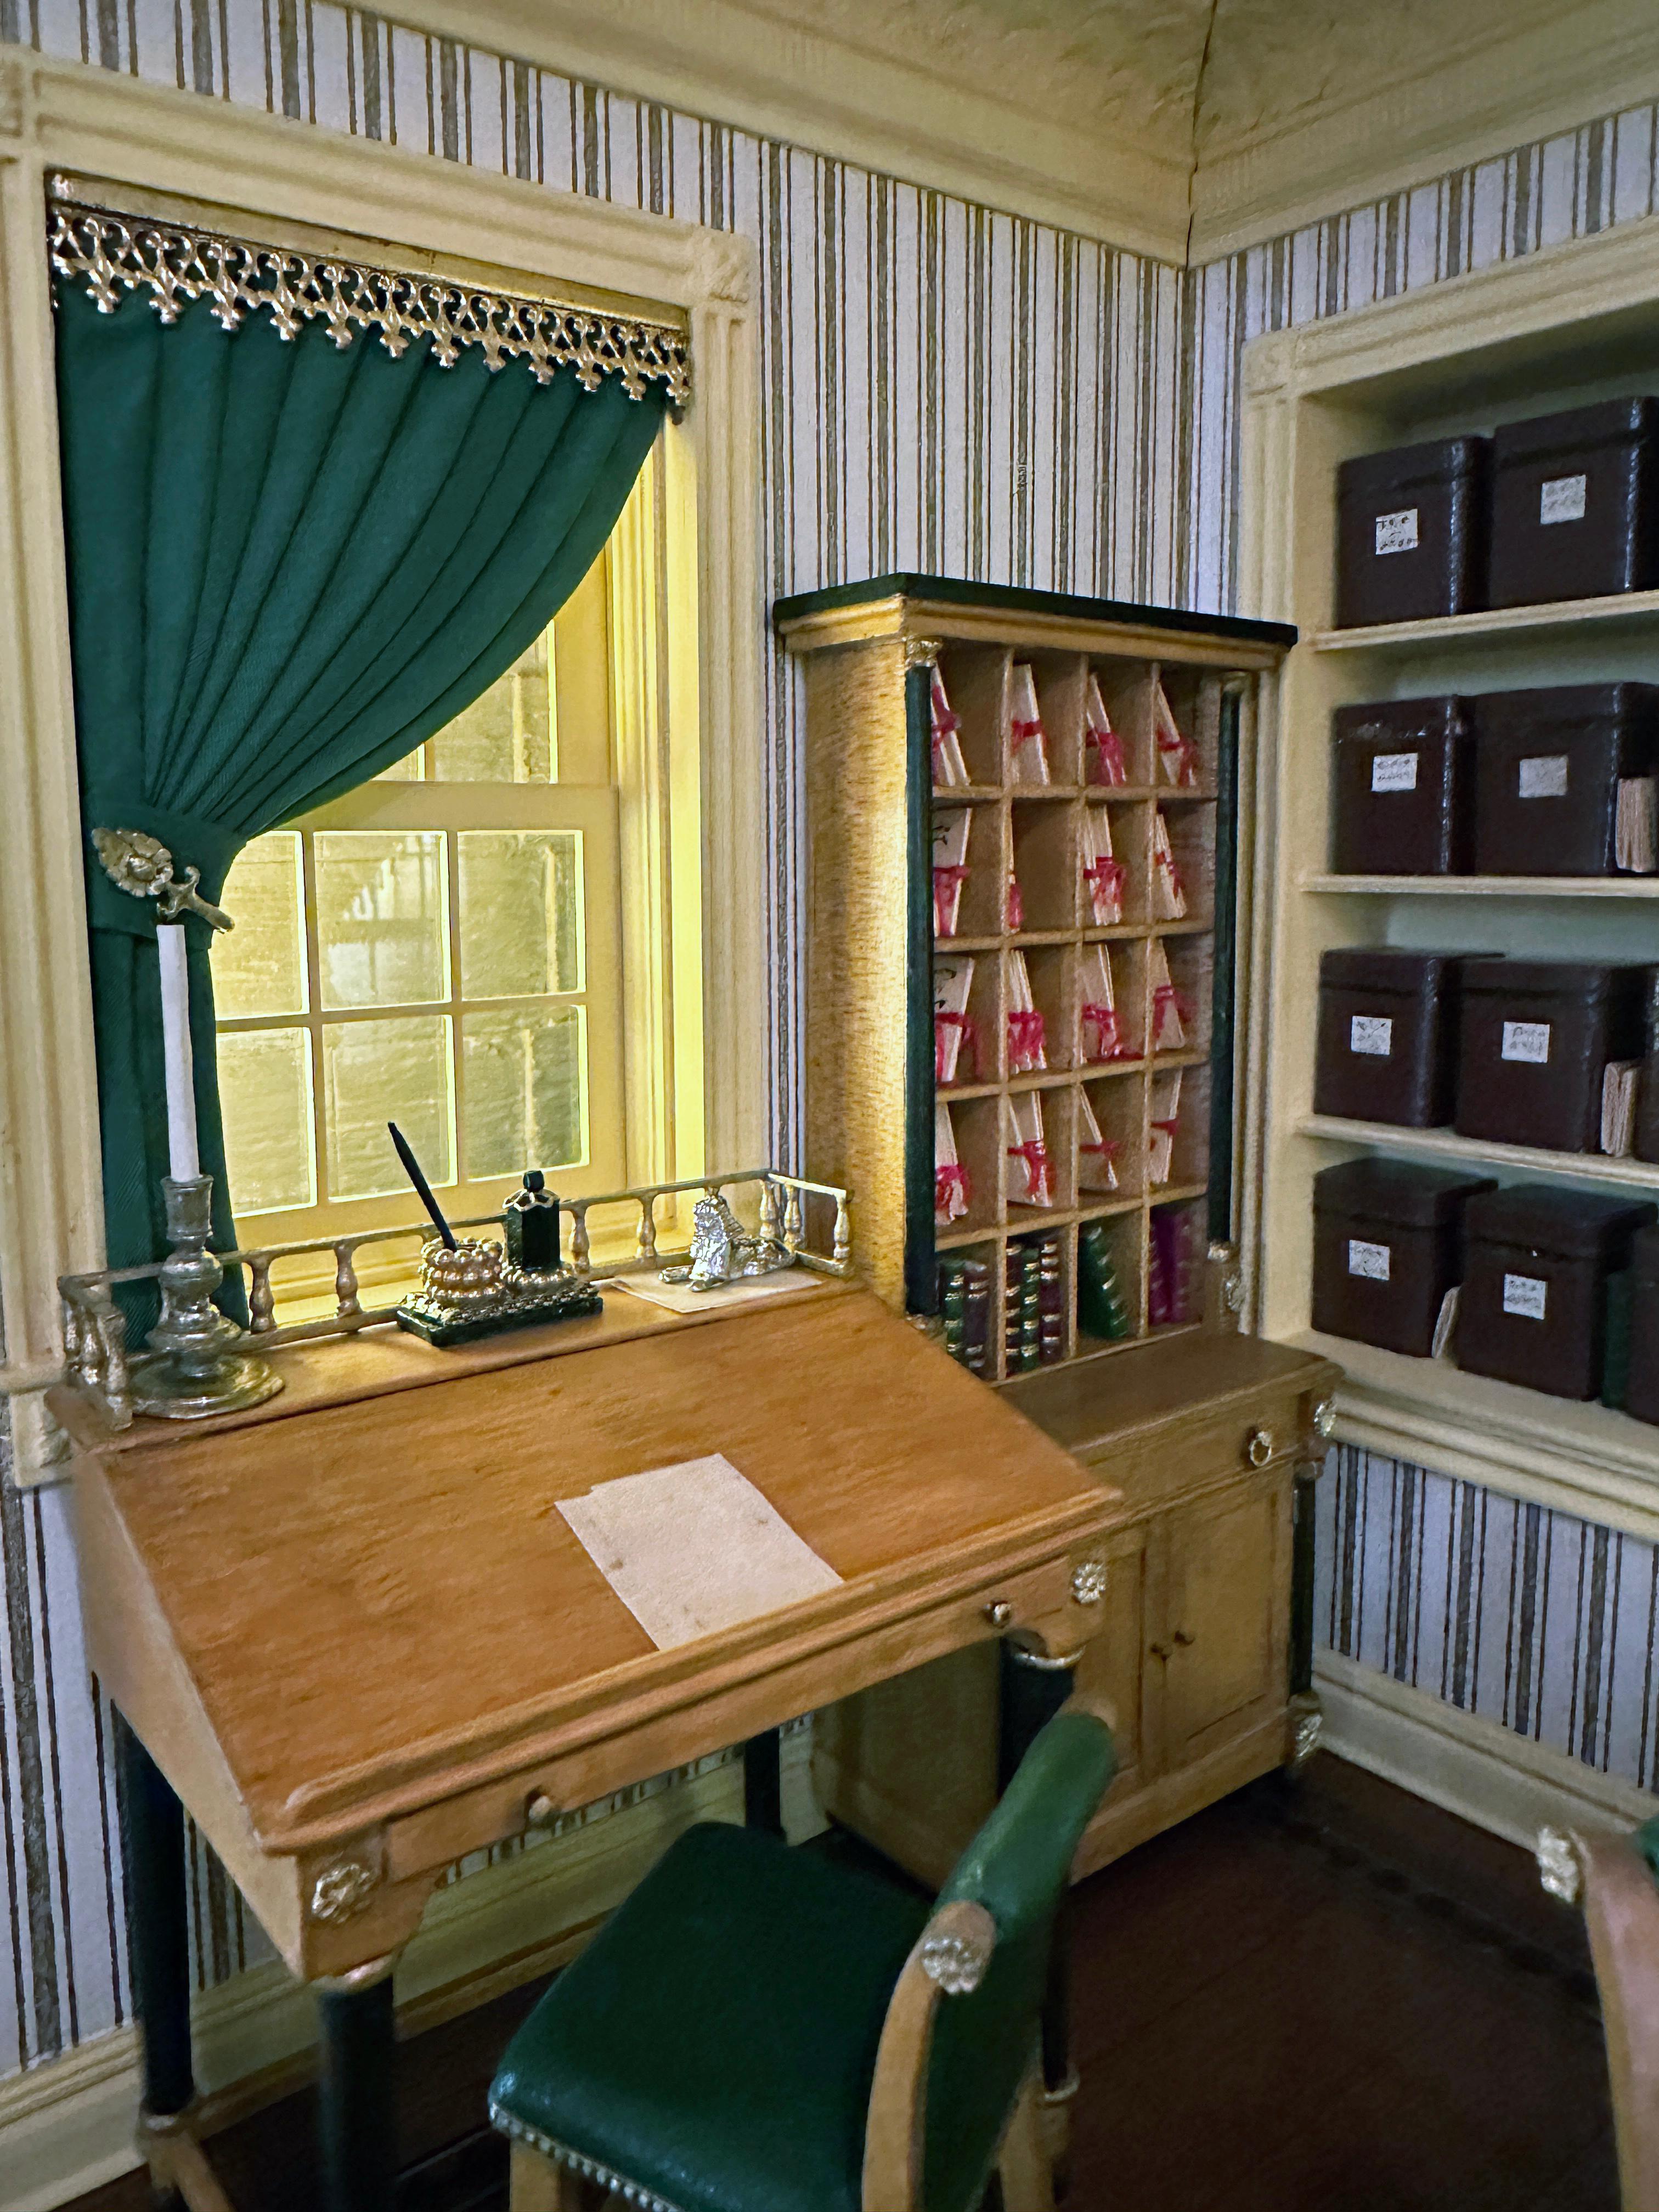 The details are so painstakingly exact that the viewer is deceived into believing they are viewing a full scale replica of a lawyer's office from 1885. 
 The Kupjack Studios are masters of the miniature world.  From the smallest of details such as